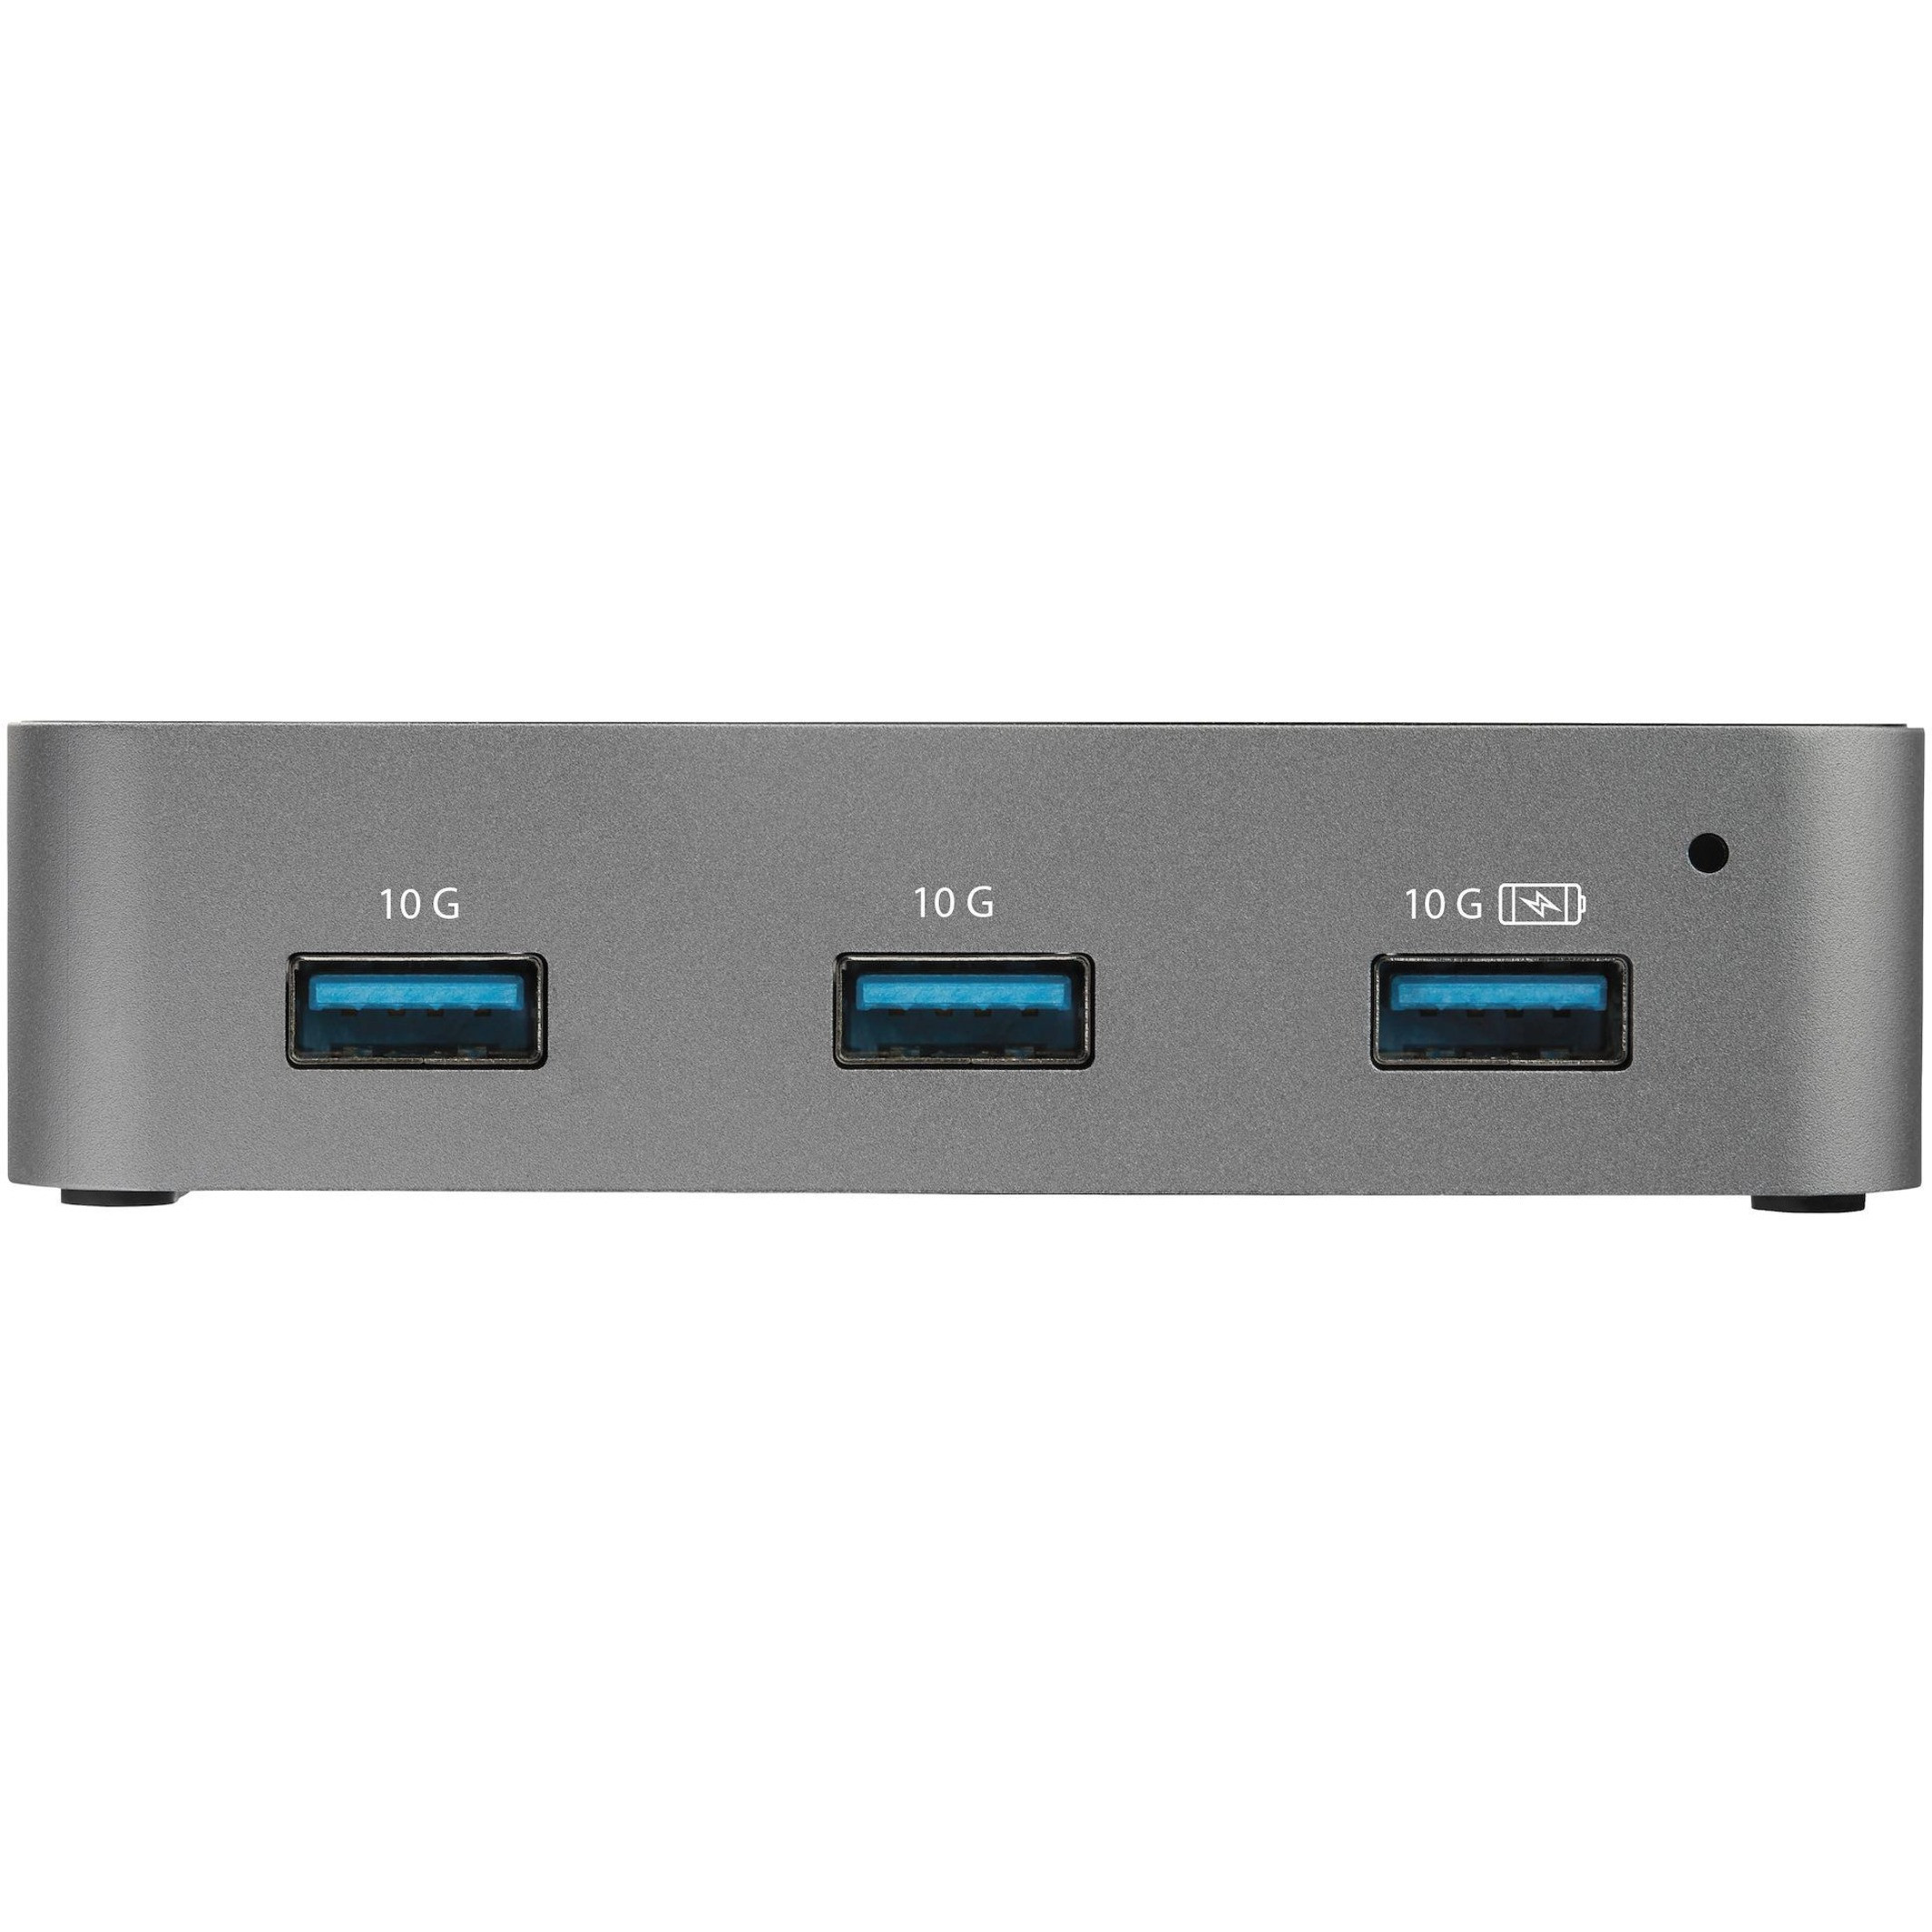 Startech .com 4 Port USB C Hub with Power Adapter, USB 3.1/3.2 Gen 2  (10Gbps), 4x USB Type A, Self Powered, Fast Charge Port, Mountable4-Port